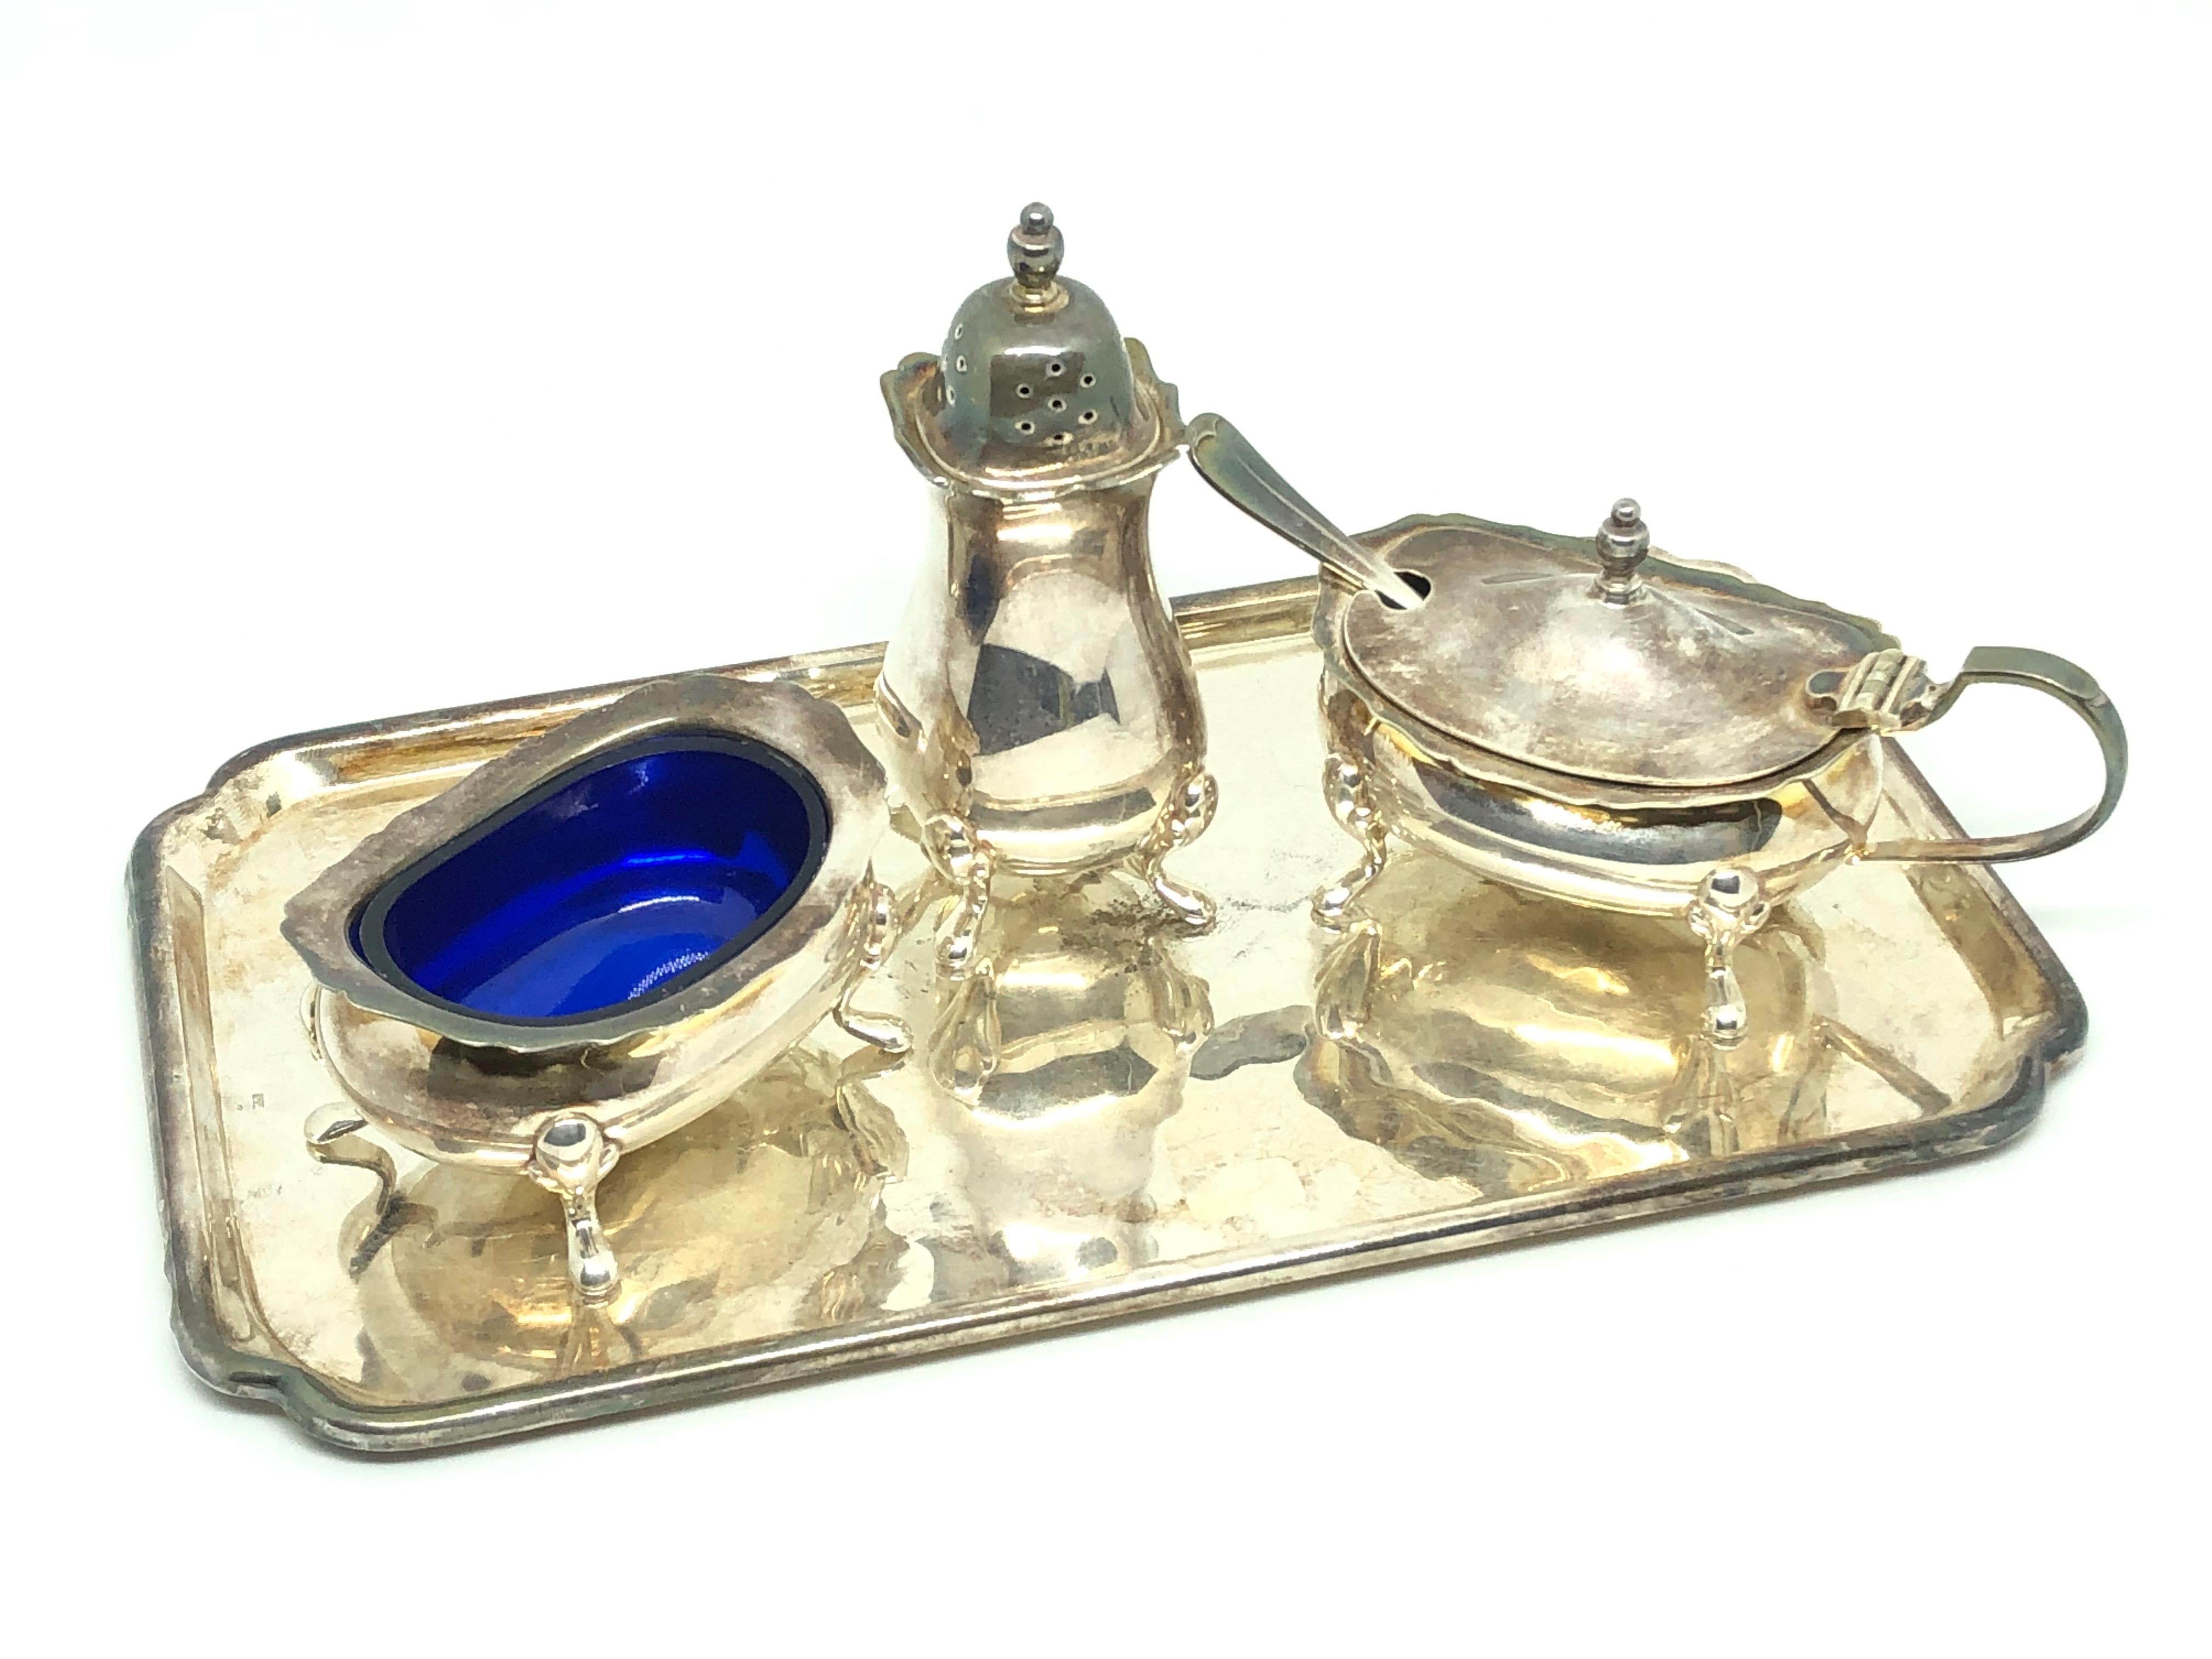 Gorgeous silver plated set of open salt and Pepper Shaker with a Mustard pot on a tray. A beautiful decorative item. Found on a estate sale in Malmo, Sweden. Made by Barker Ellis in England. A nice addition to any table.